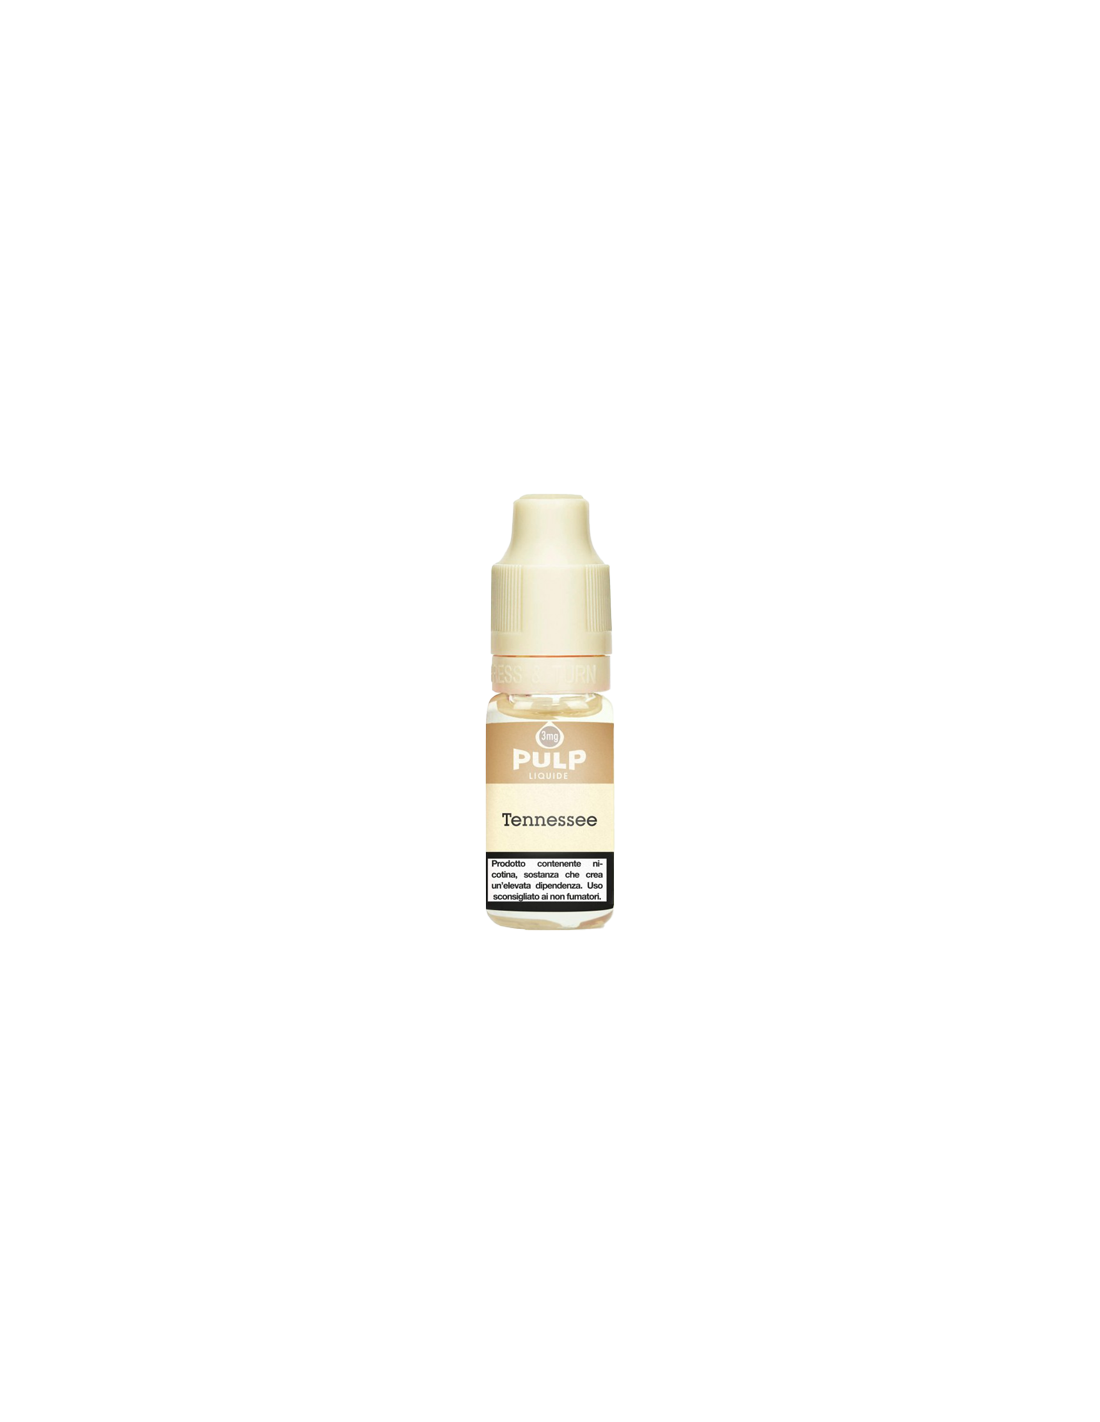 Pulp Outlet - Tennessee Liquido Pronto 10ml Tabacco